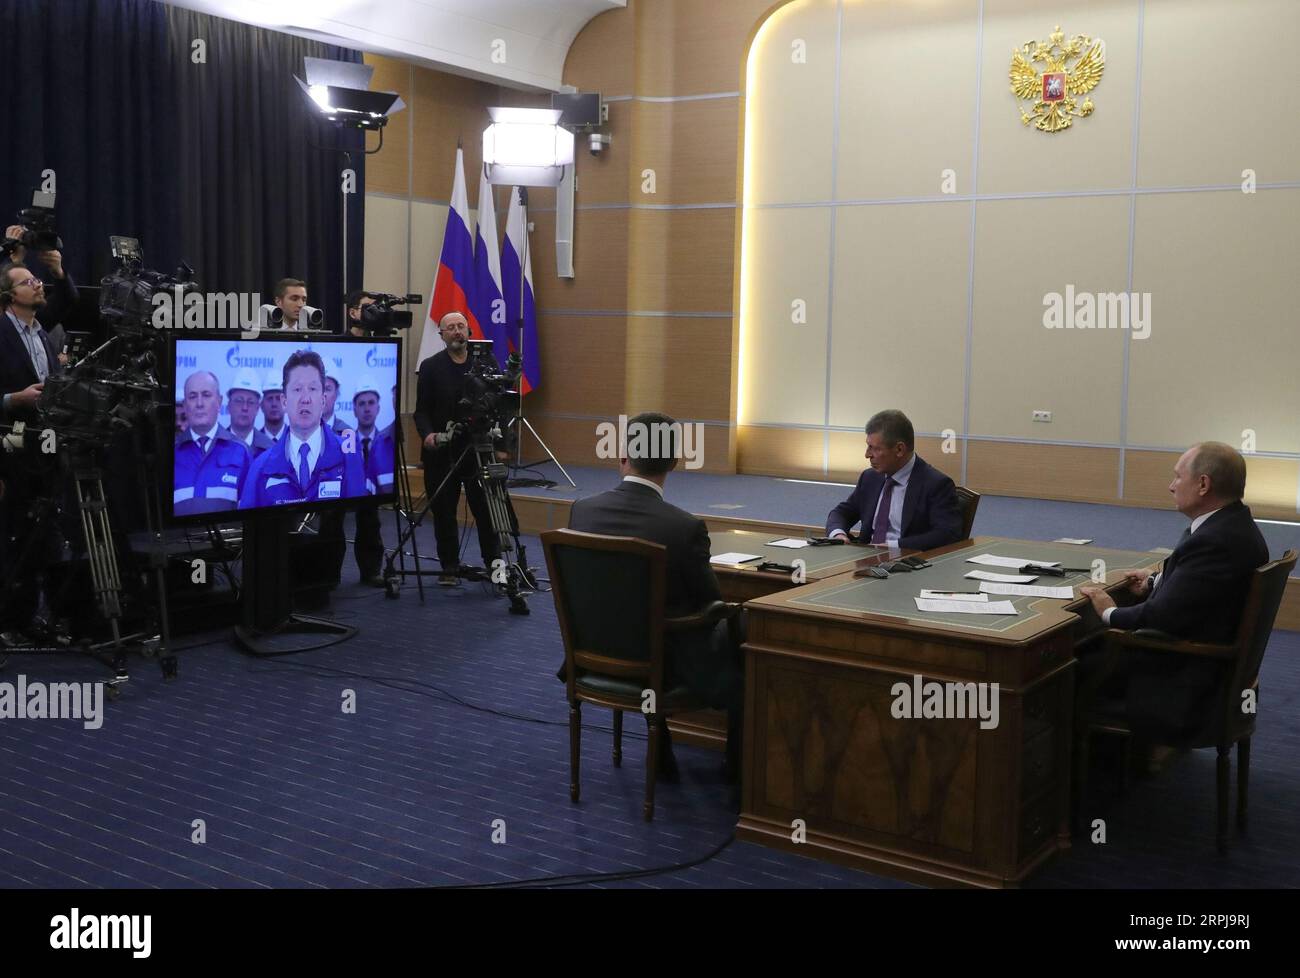 191202 -- MOSCOW, Dec. 2, 2019 Xinhua -- Russian President Vladimir Putin 1st R, Russian Energy Minister Alexander Novak L and Deputy Prime Minister Dmitry Kozak 2nd R watch the launching ceremony of the China-Russia east-route natural gas pipeline via teleconference in Sochi, Russia, Dec. 2, 2019. Chinese President Xi Jinping had a video call with his Russian counterpart Vladimir Putin Monday afternoon, as the two heads of state jointly witnessed the launching ceremony of the China-Russia east-route natural gas pipeline. Sputnik/Handout via Xinhua RUSSIA-CHINA-PUTIN-NATURAL GAS PIPELINE-LAUNC Stock Photo